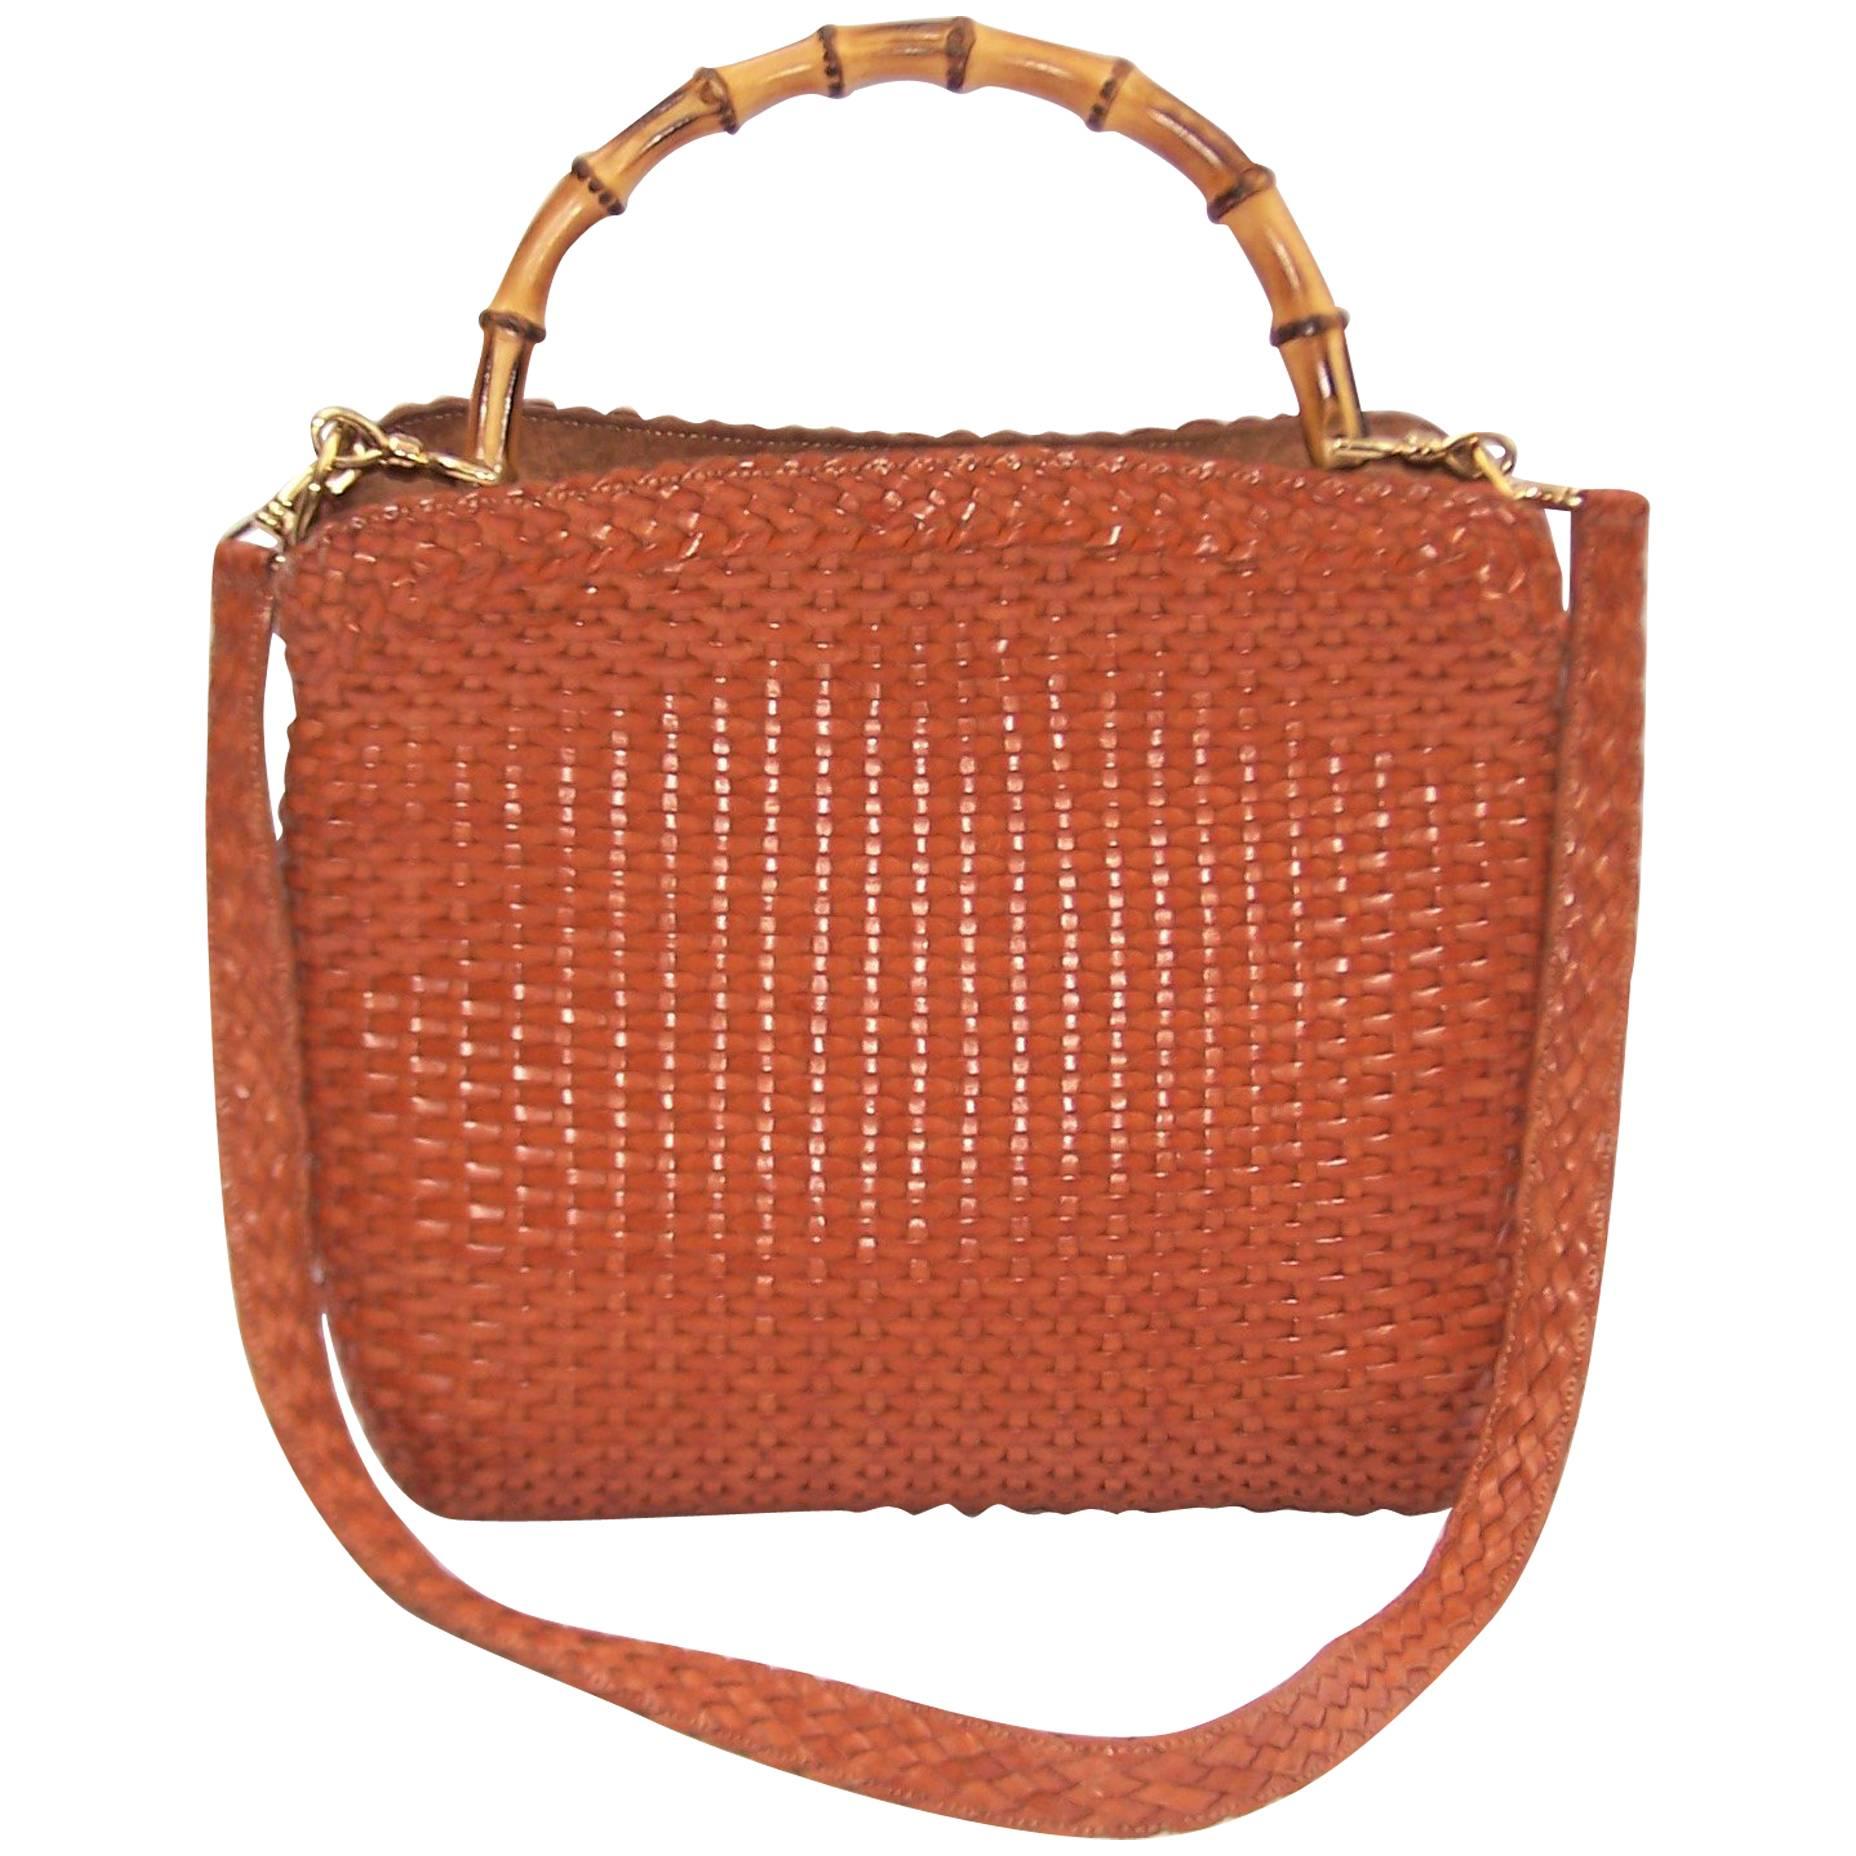 C.1990 Gucci Cognac Woven Leather Handbag With Bamboo Handle